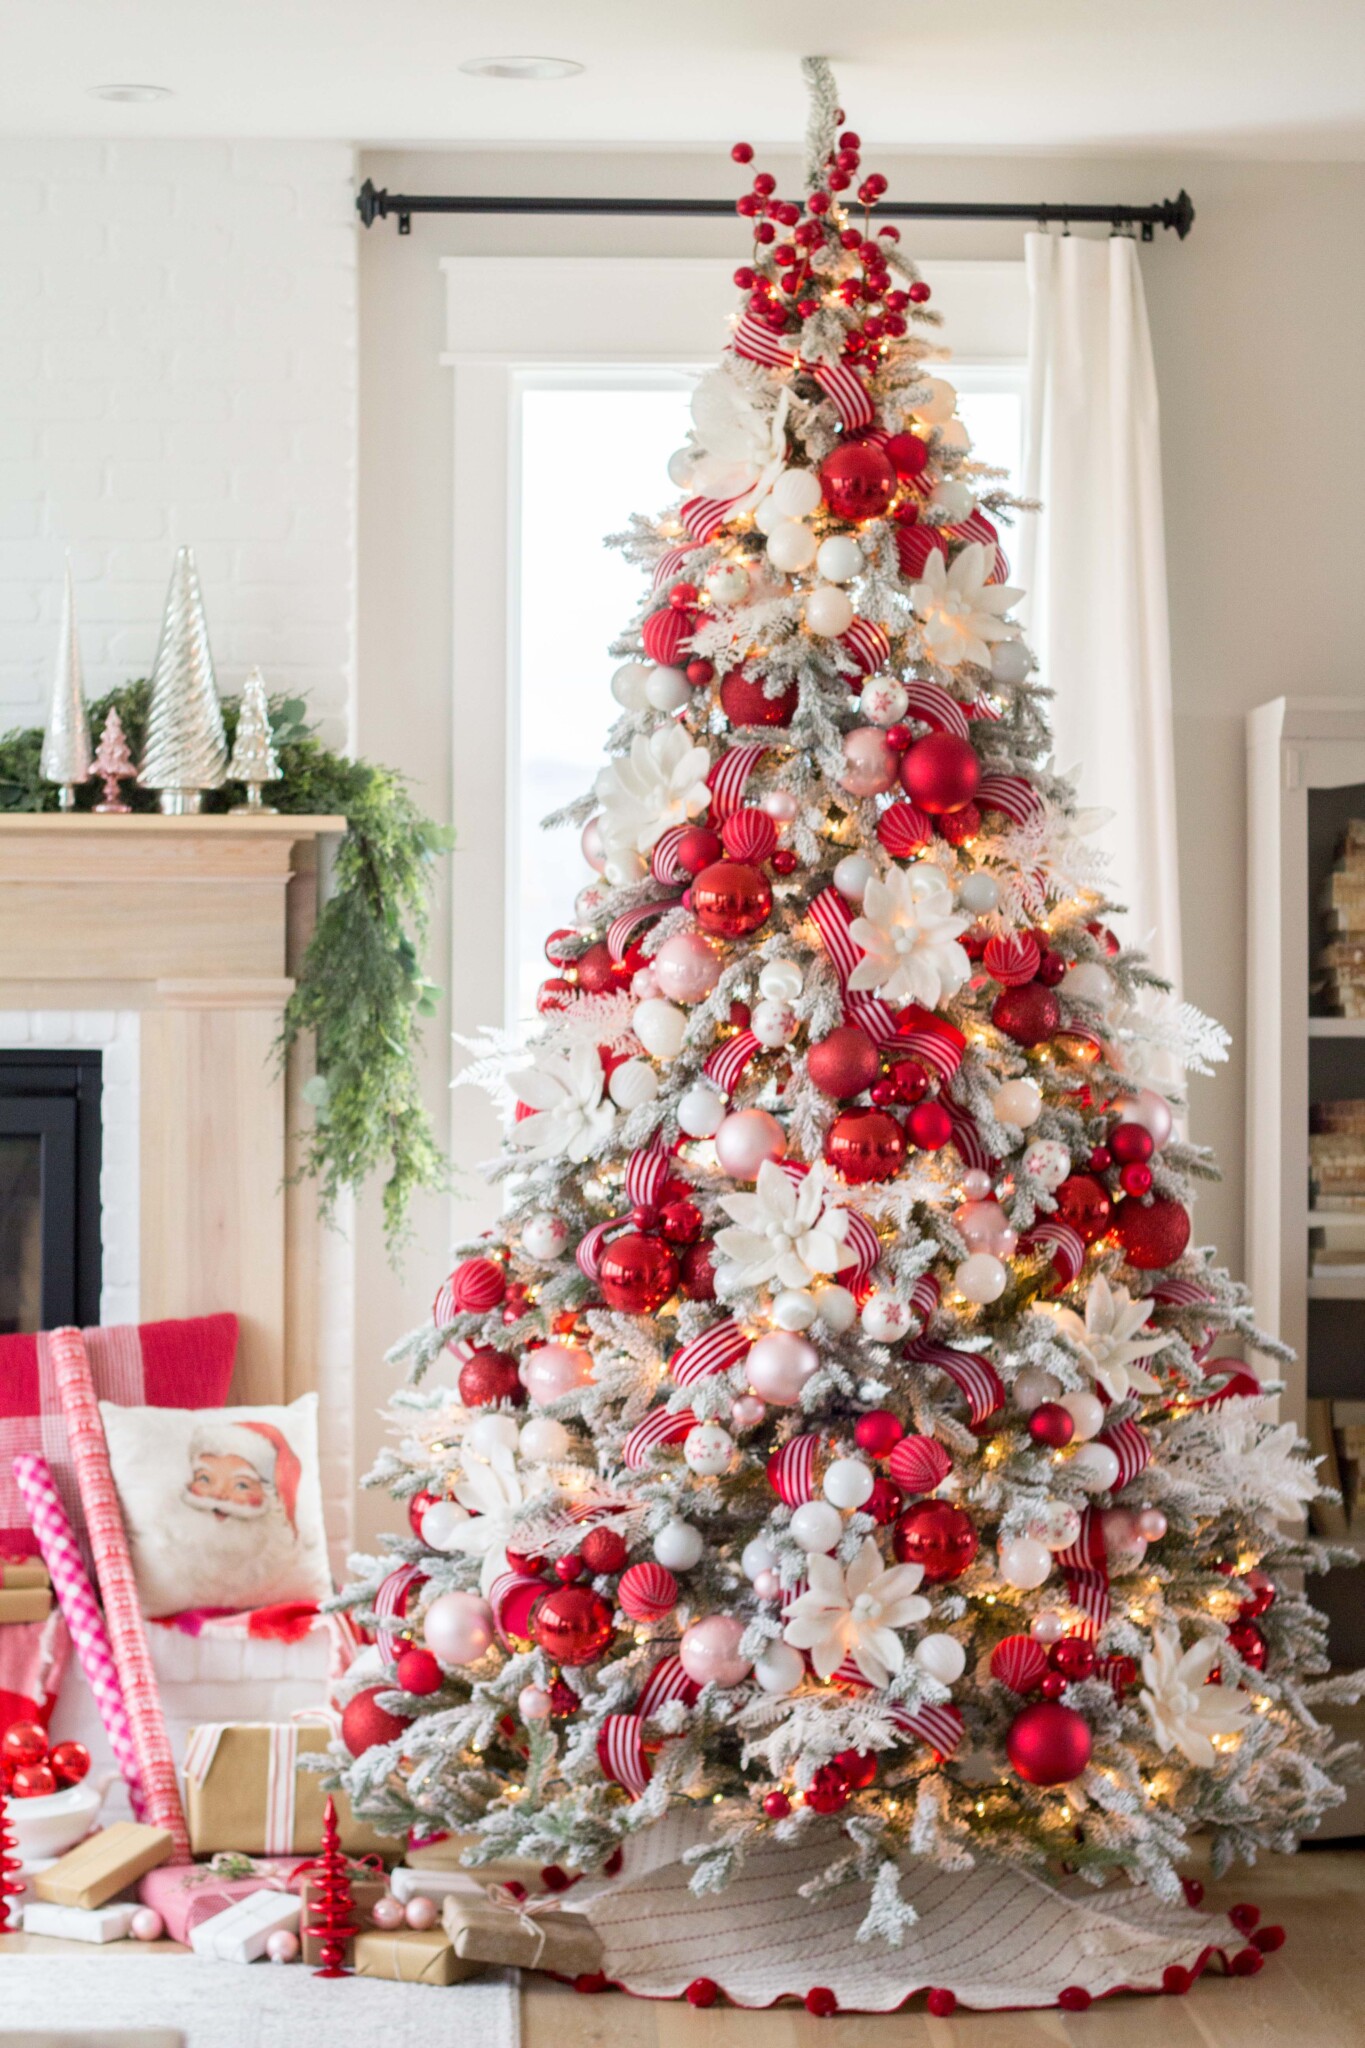 Wow - love this lush red and white Christmas tree